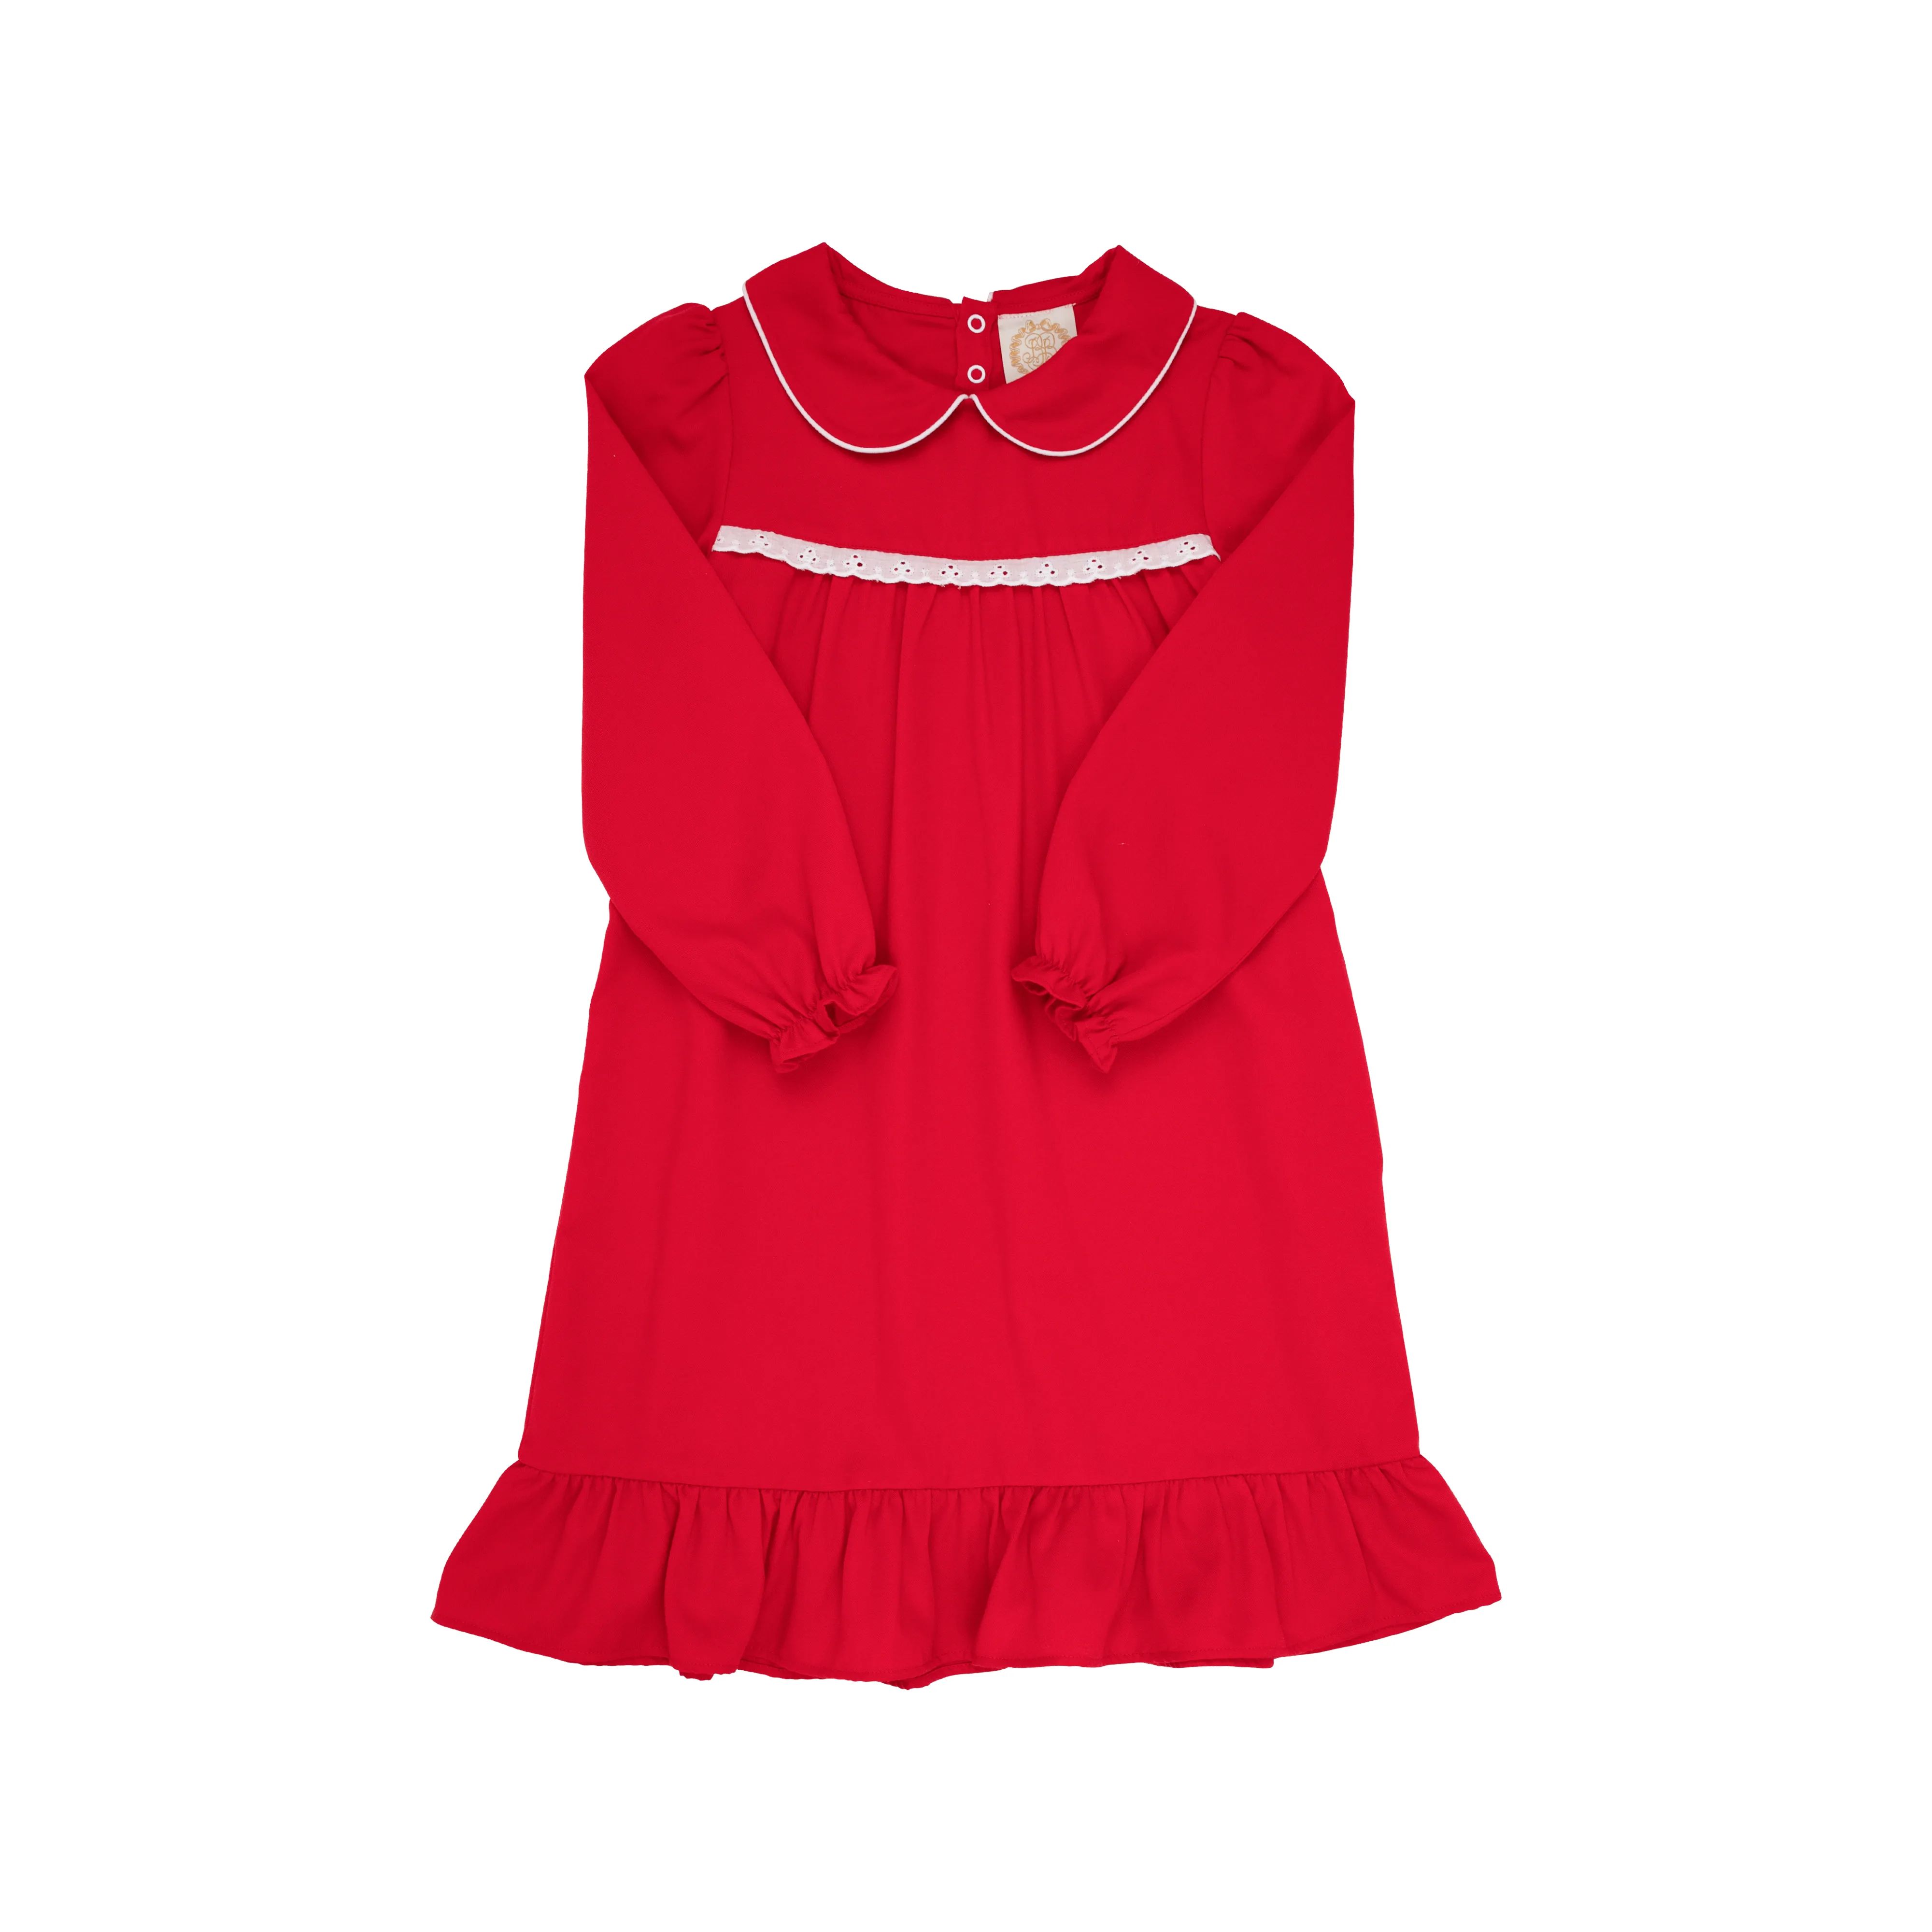 Goldie Locks Gown - Richmond Red with Worth Avenue White Eyelet | The Beaufort Bonnet Company